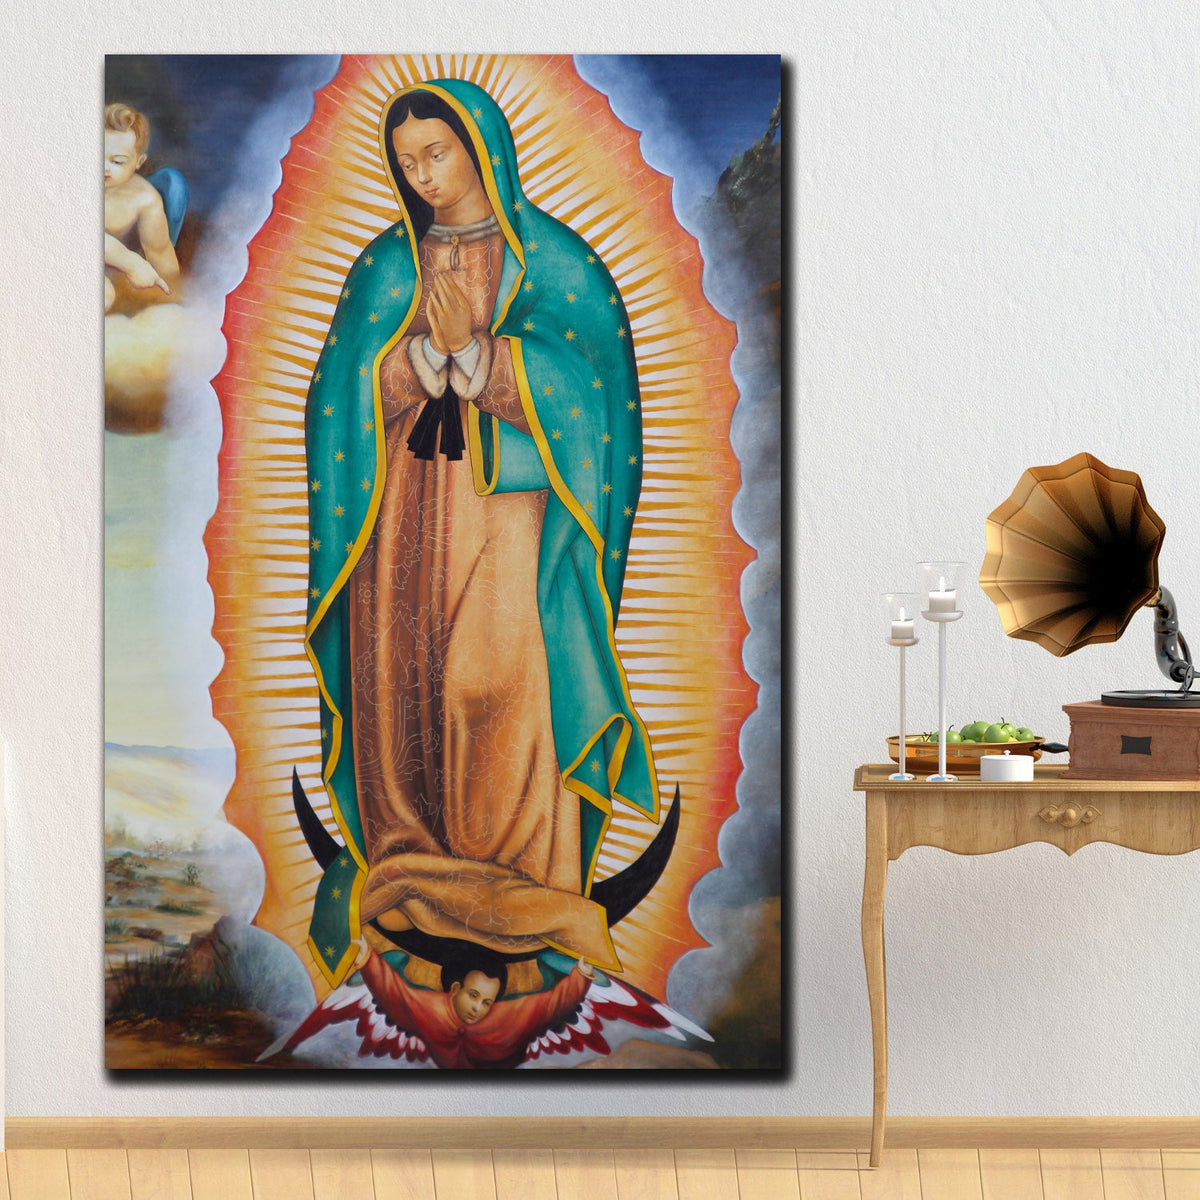 https://cdn.shopify.com/s/files/1/0387/9986/8044/products/VirginMaryofGuadalupeCanvasArtprintStretched-2.jpg